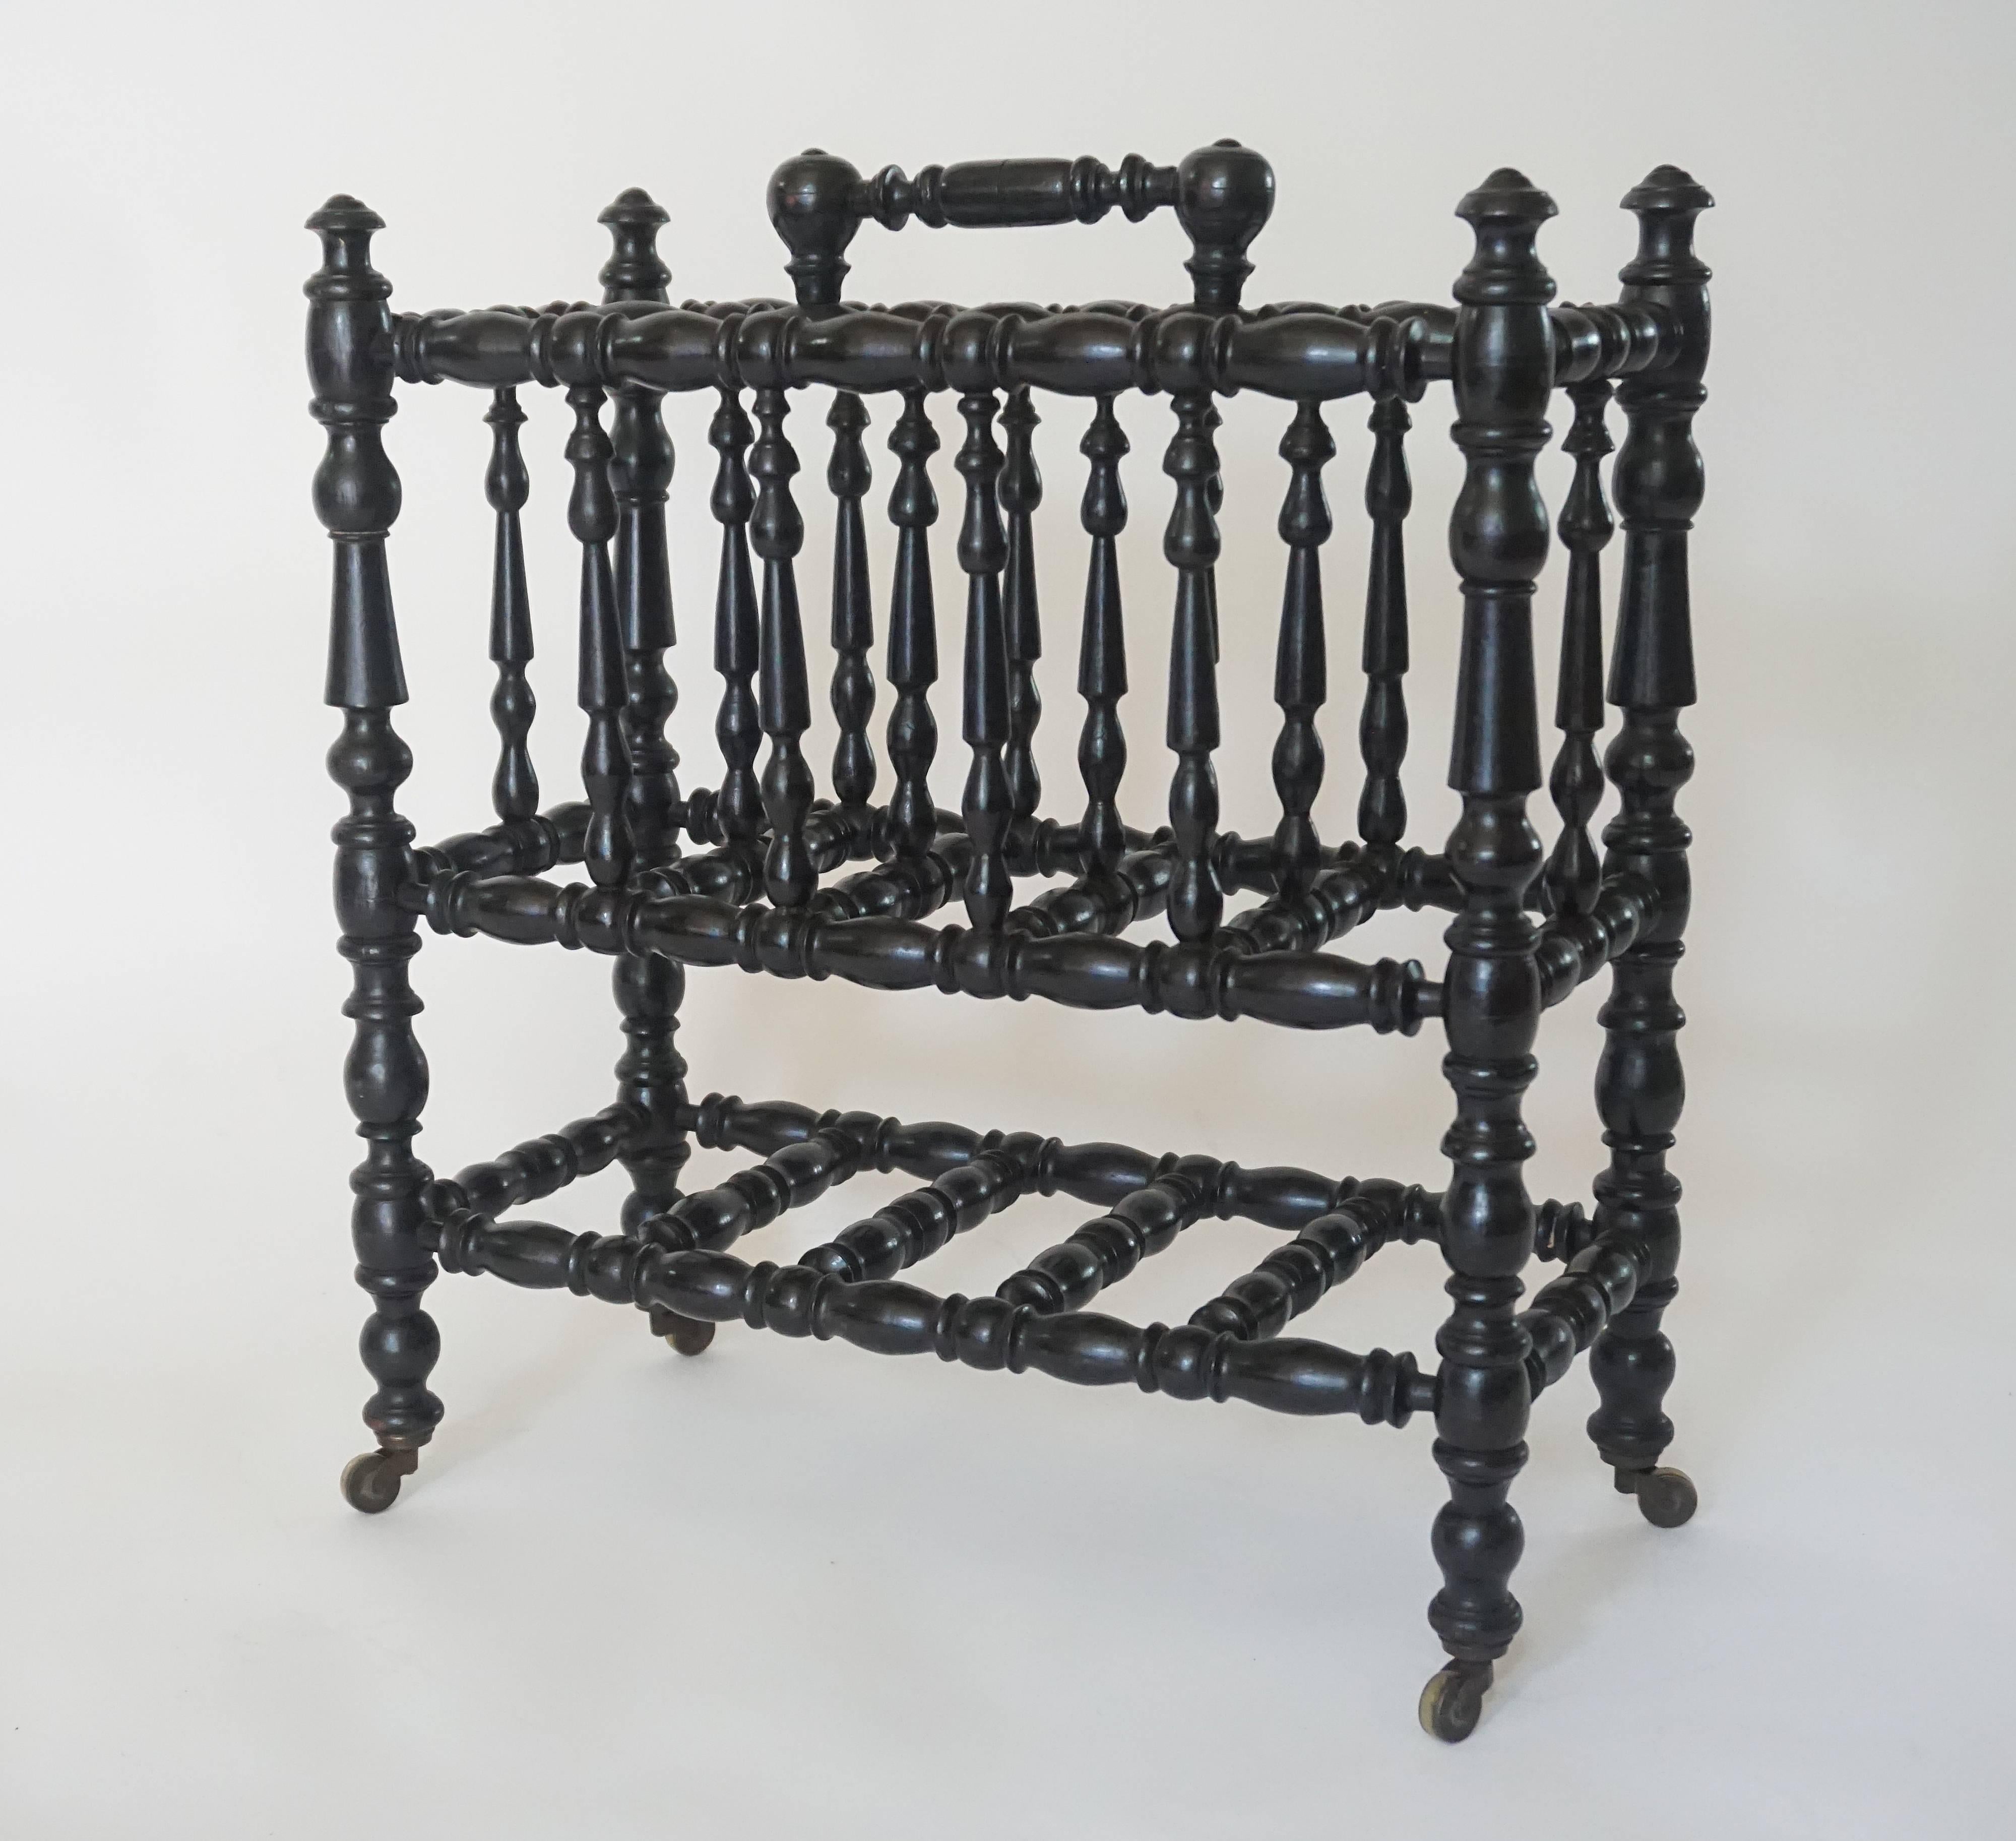 Anglo-Indian portable canterbury or magazine stand, circa 1870, having spindle-turned ebony frame with top carrying handle, two side compartments, and bottom stretcher shelf with supports on brass casters.